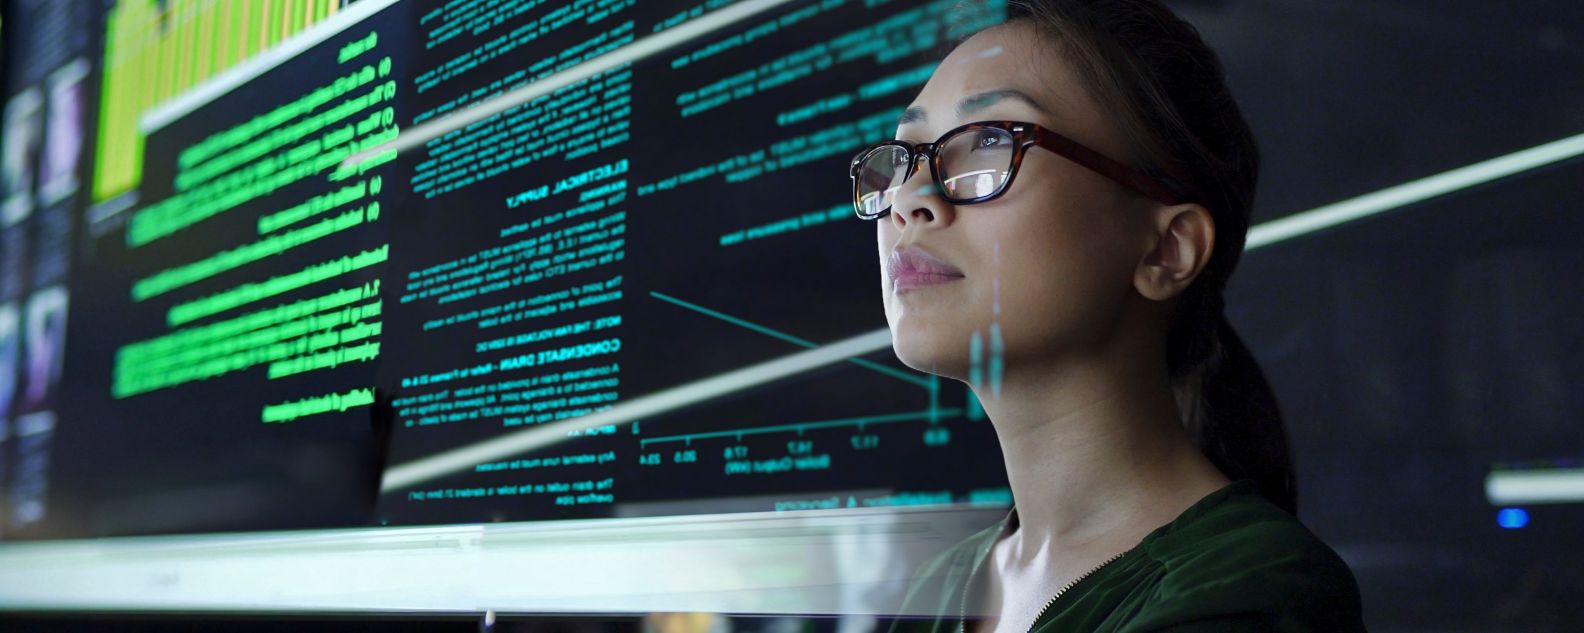 young Asian woman looking at see through data whilst seated in a dark office